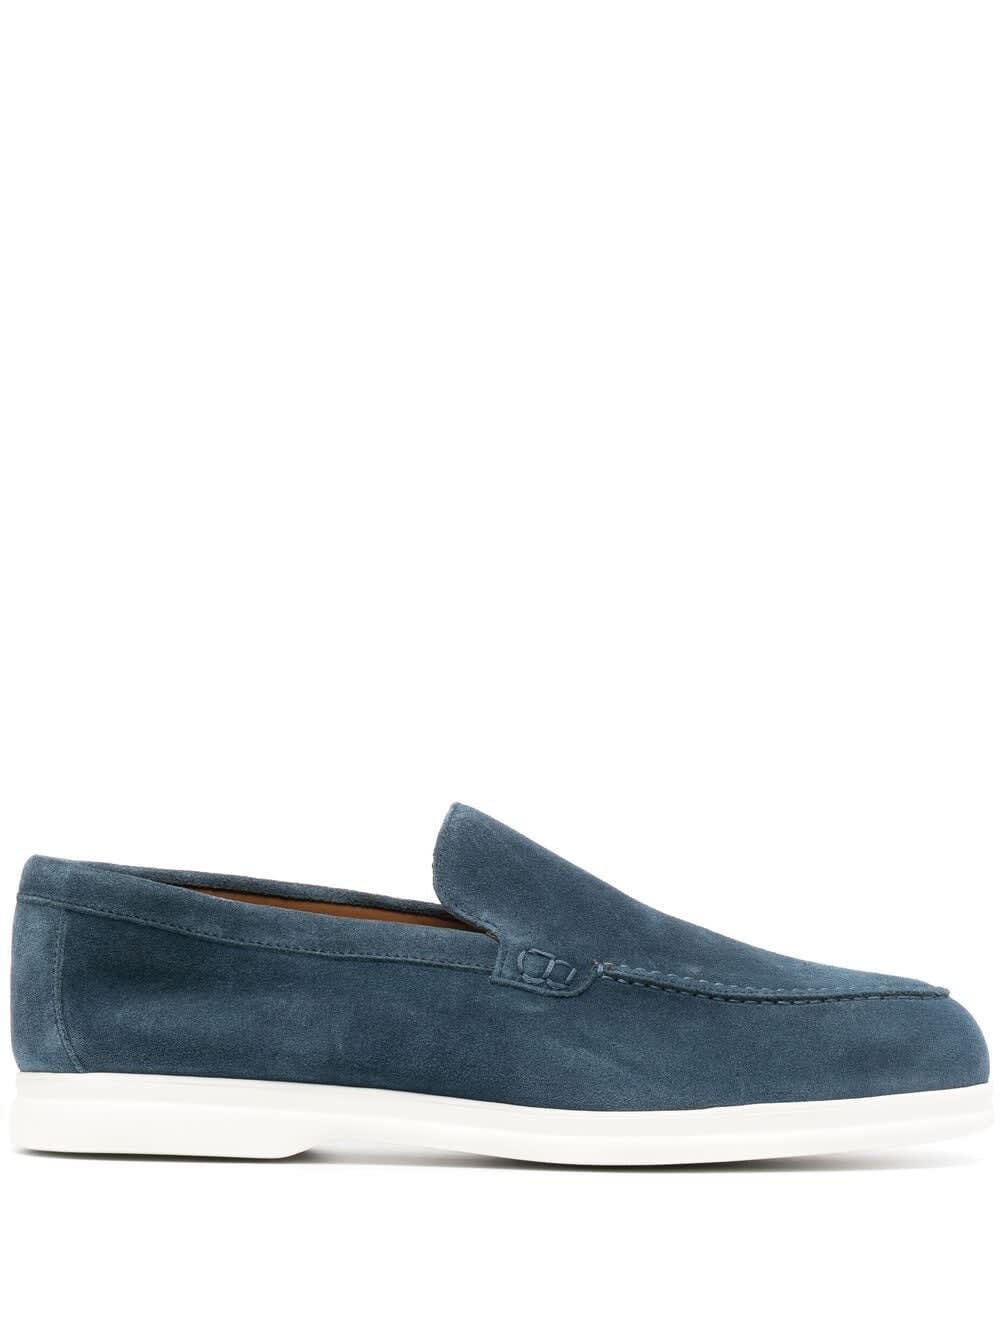 Doucals Man Blue And White Sports Loafer In Suede